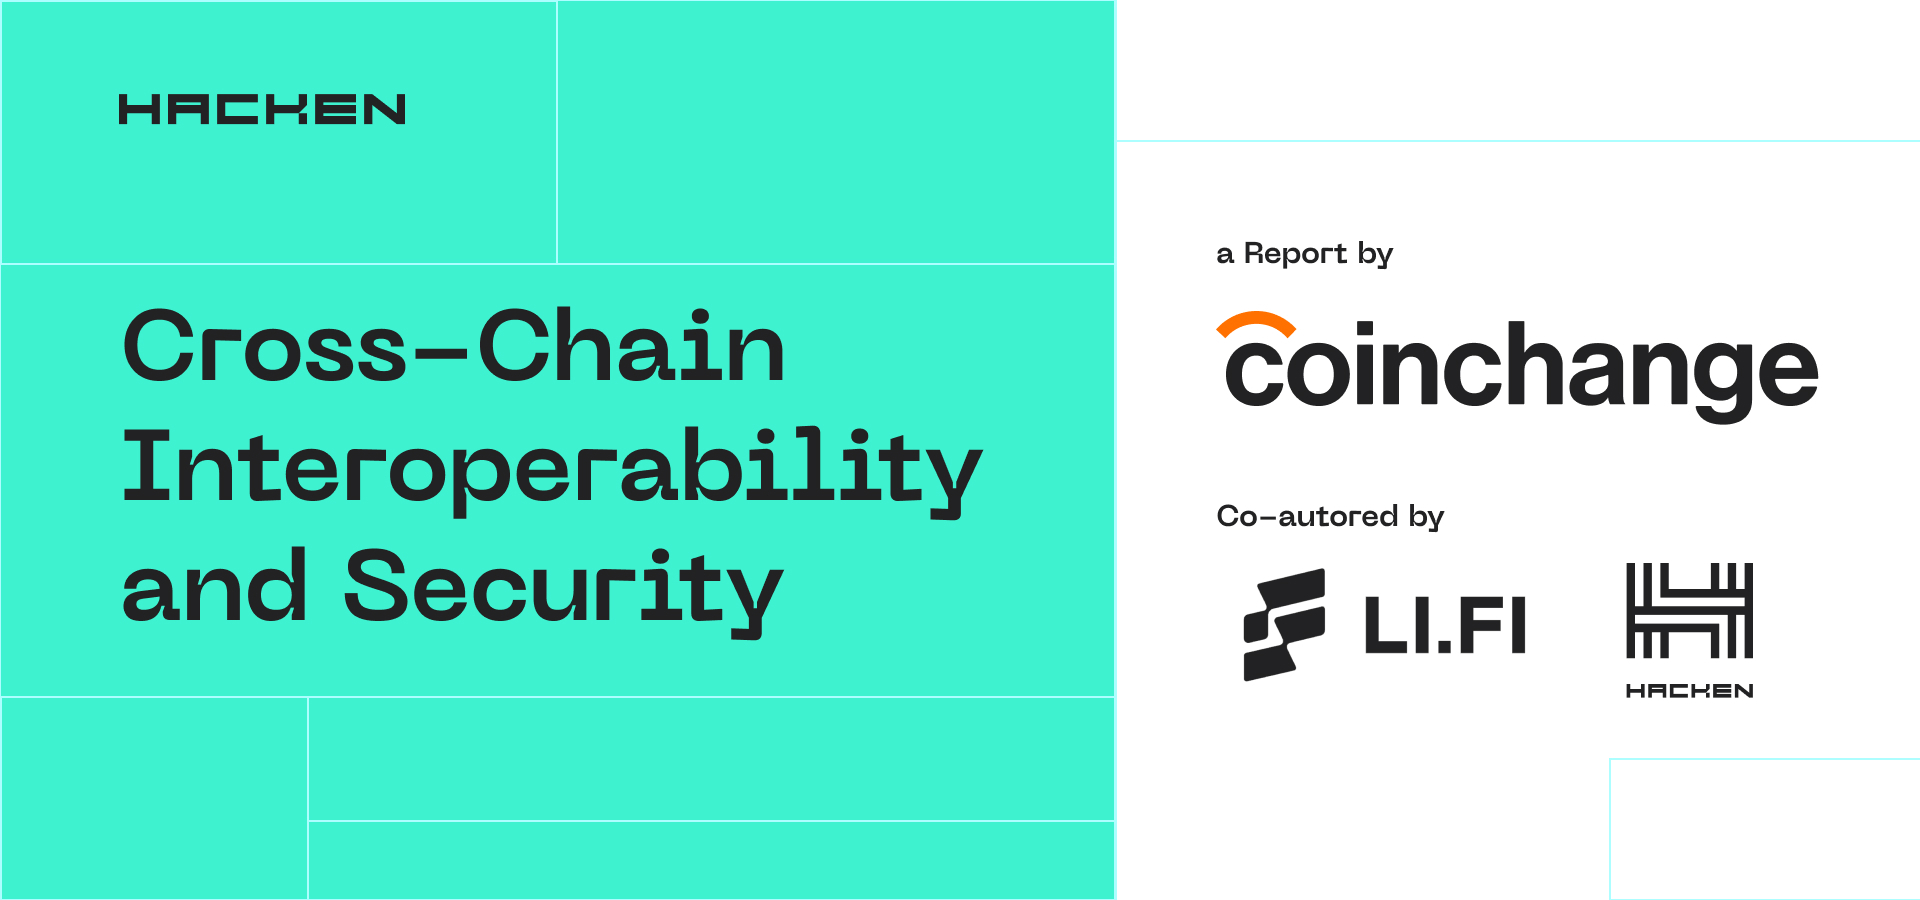 Cross-Chain Interoperability and Security – Executive Summary of Coinchange Report